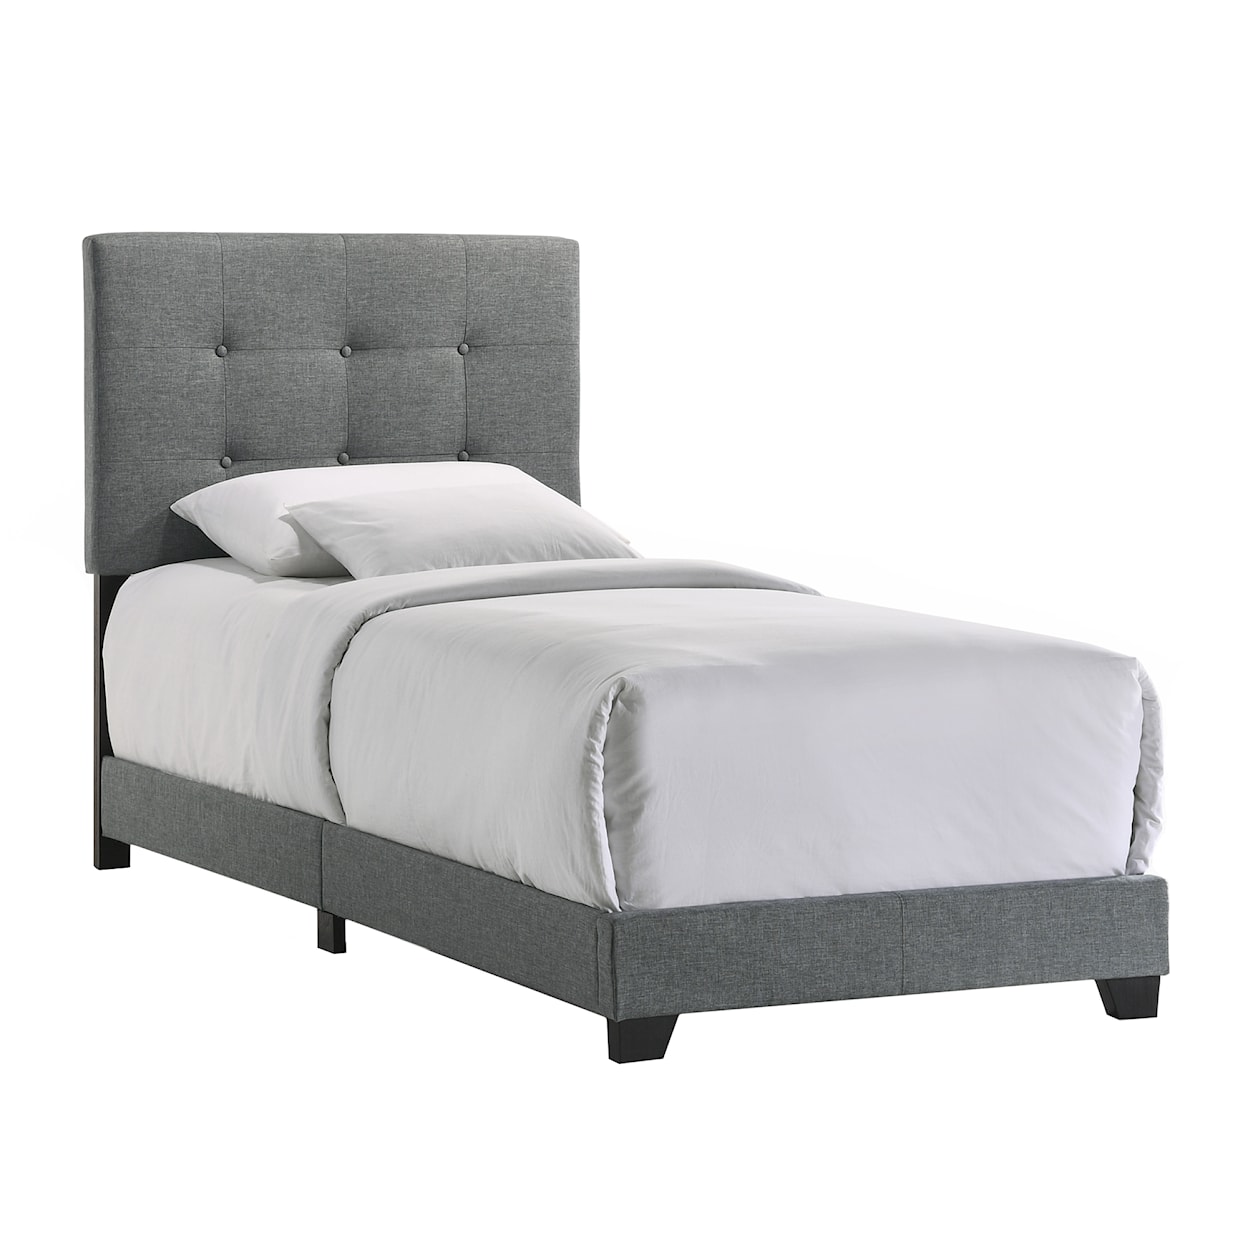 Intercon Upholstered Beds Addyson Twin Upholstered Bed